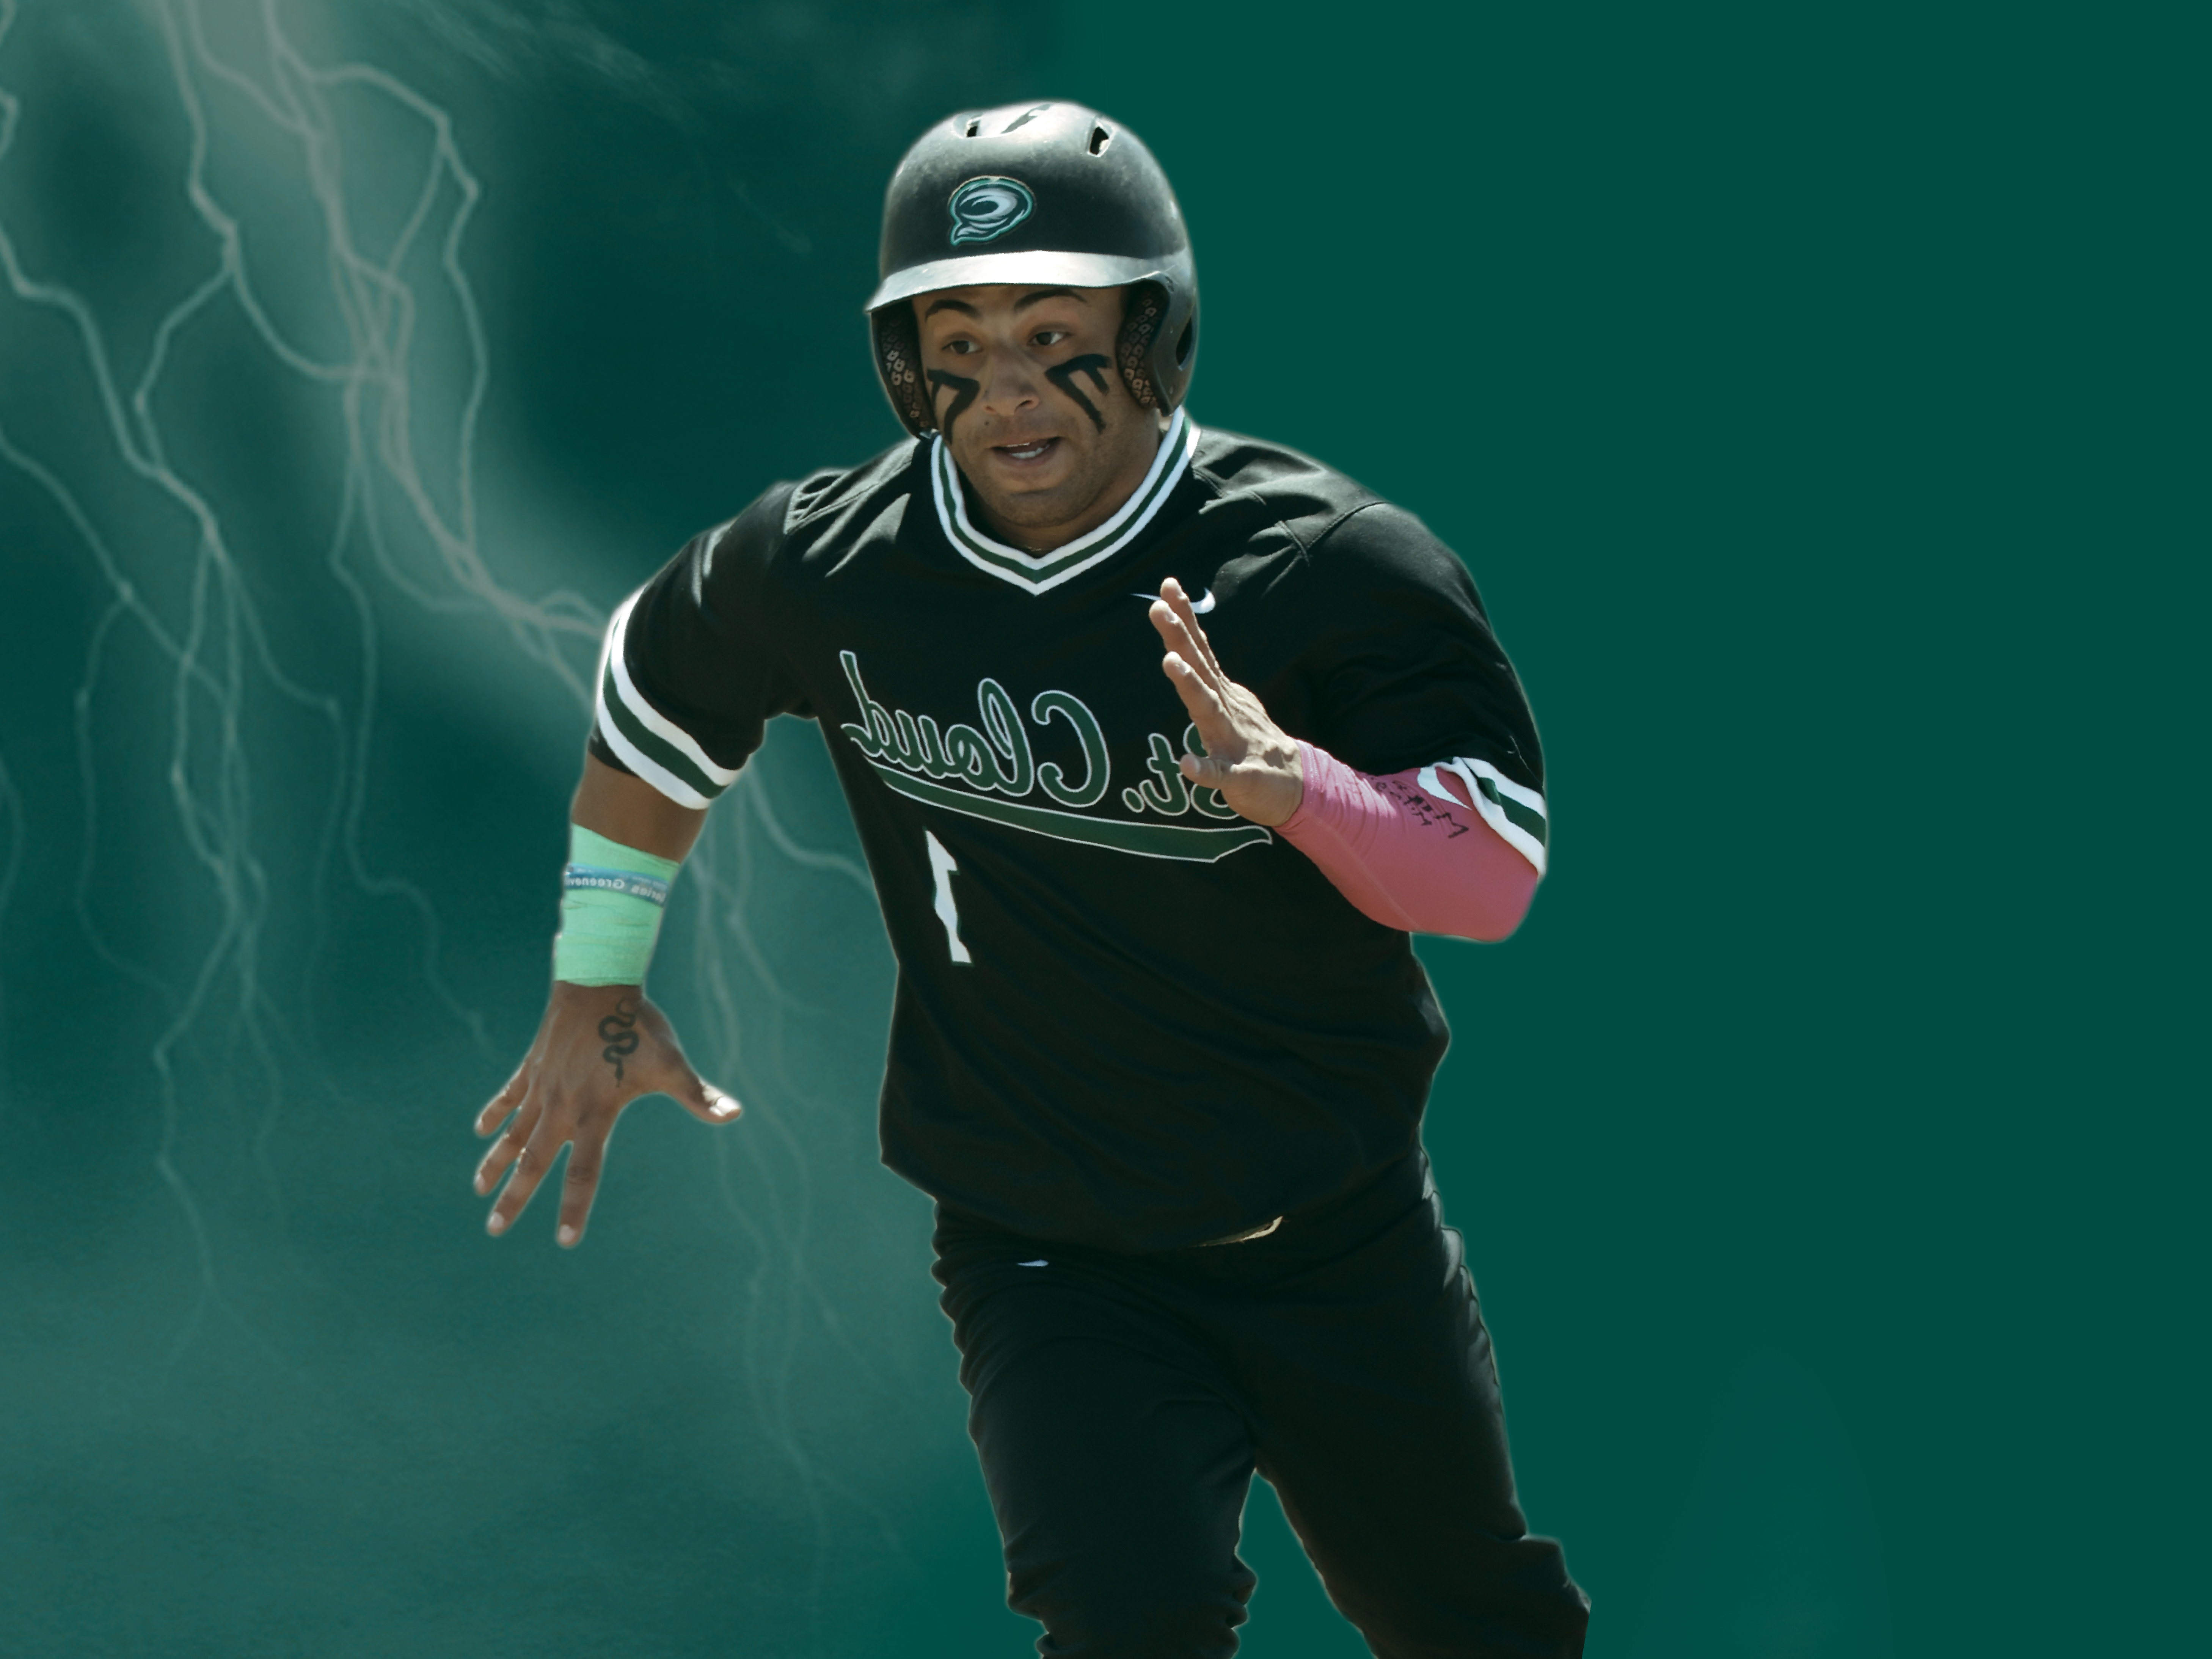 Baseball player running with green background